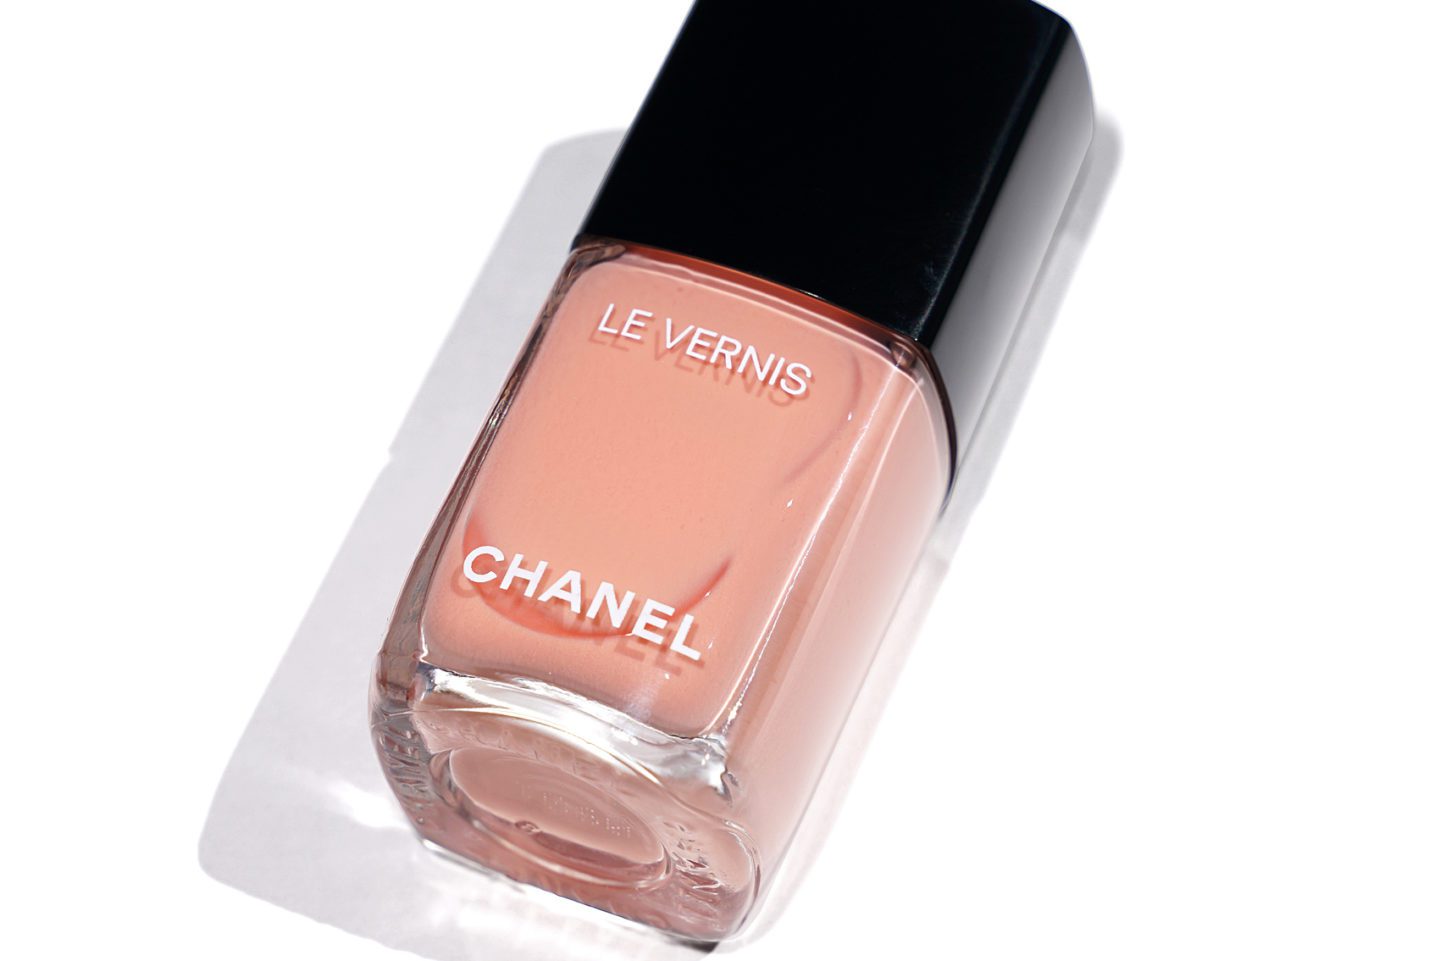 Chanel Le Vernis Tulle | The Beauty Look Book